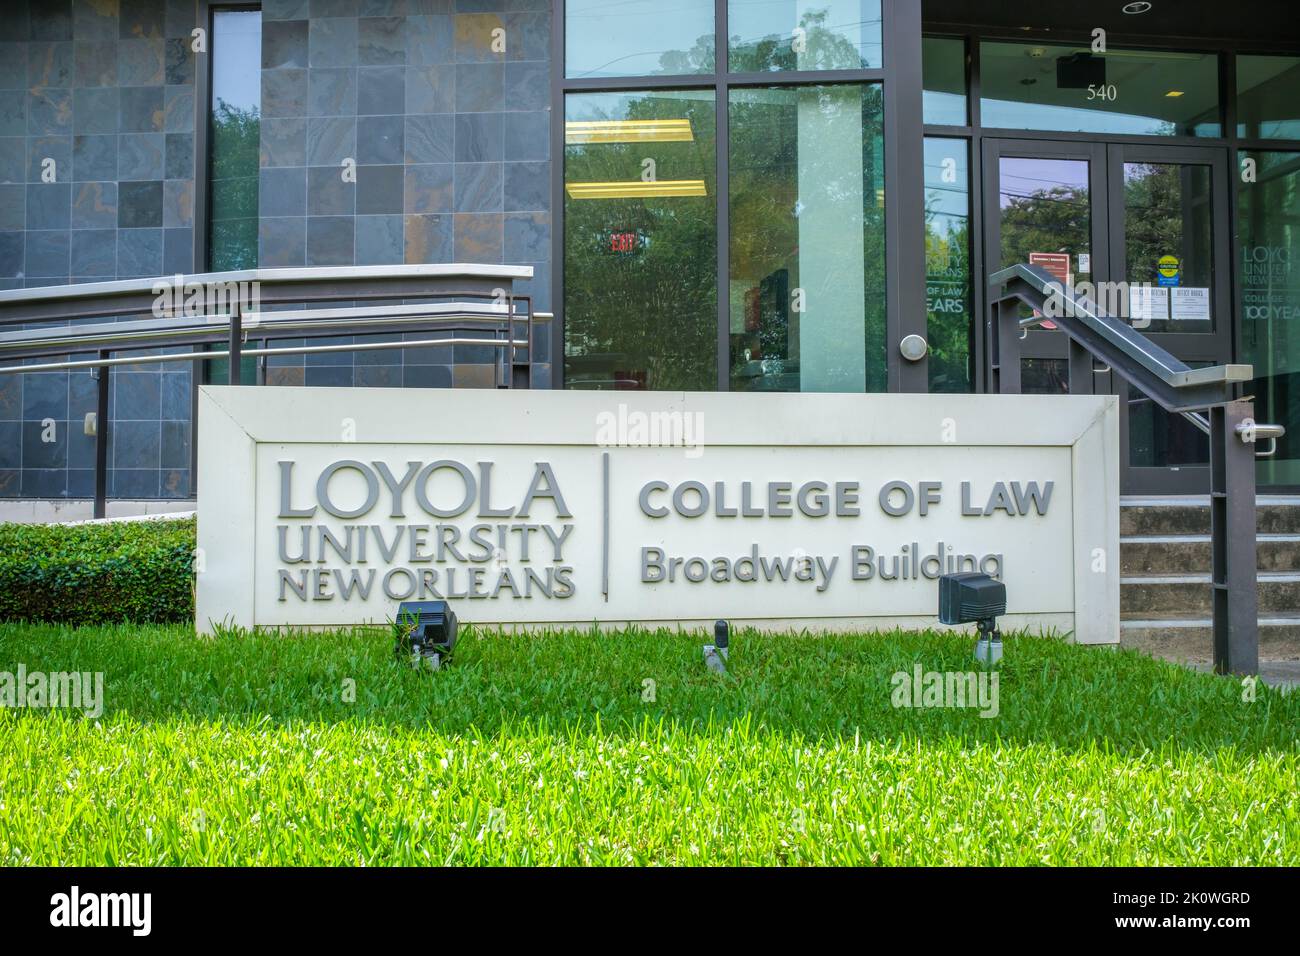 NEW ORLEANS, LA, USA - SEPTEMBER 7, 2022: Sign and entrance to Loyola University New Orleans College of Law Broadway Building Stock Photo